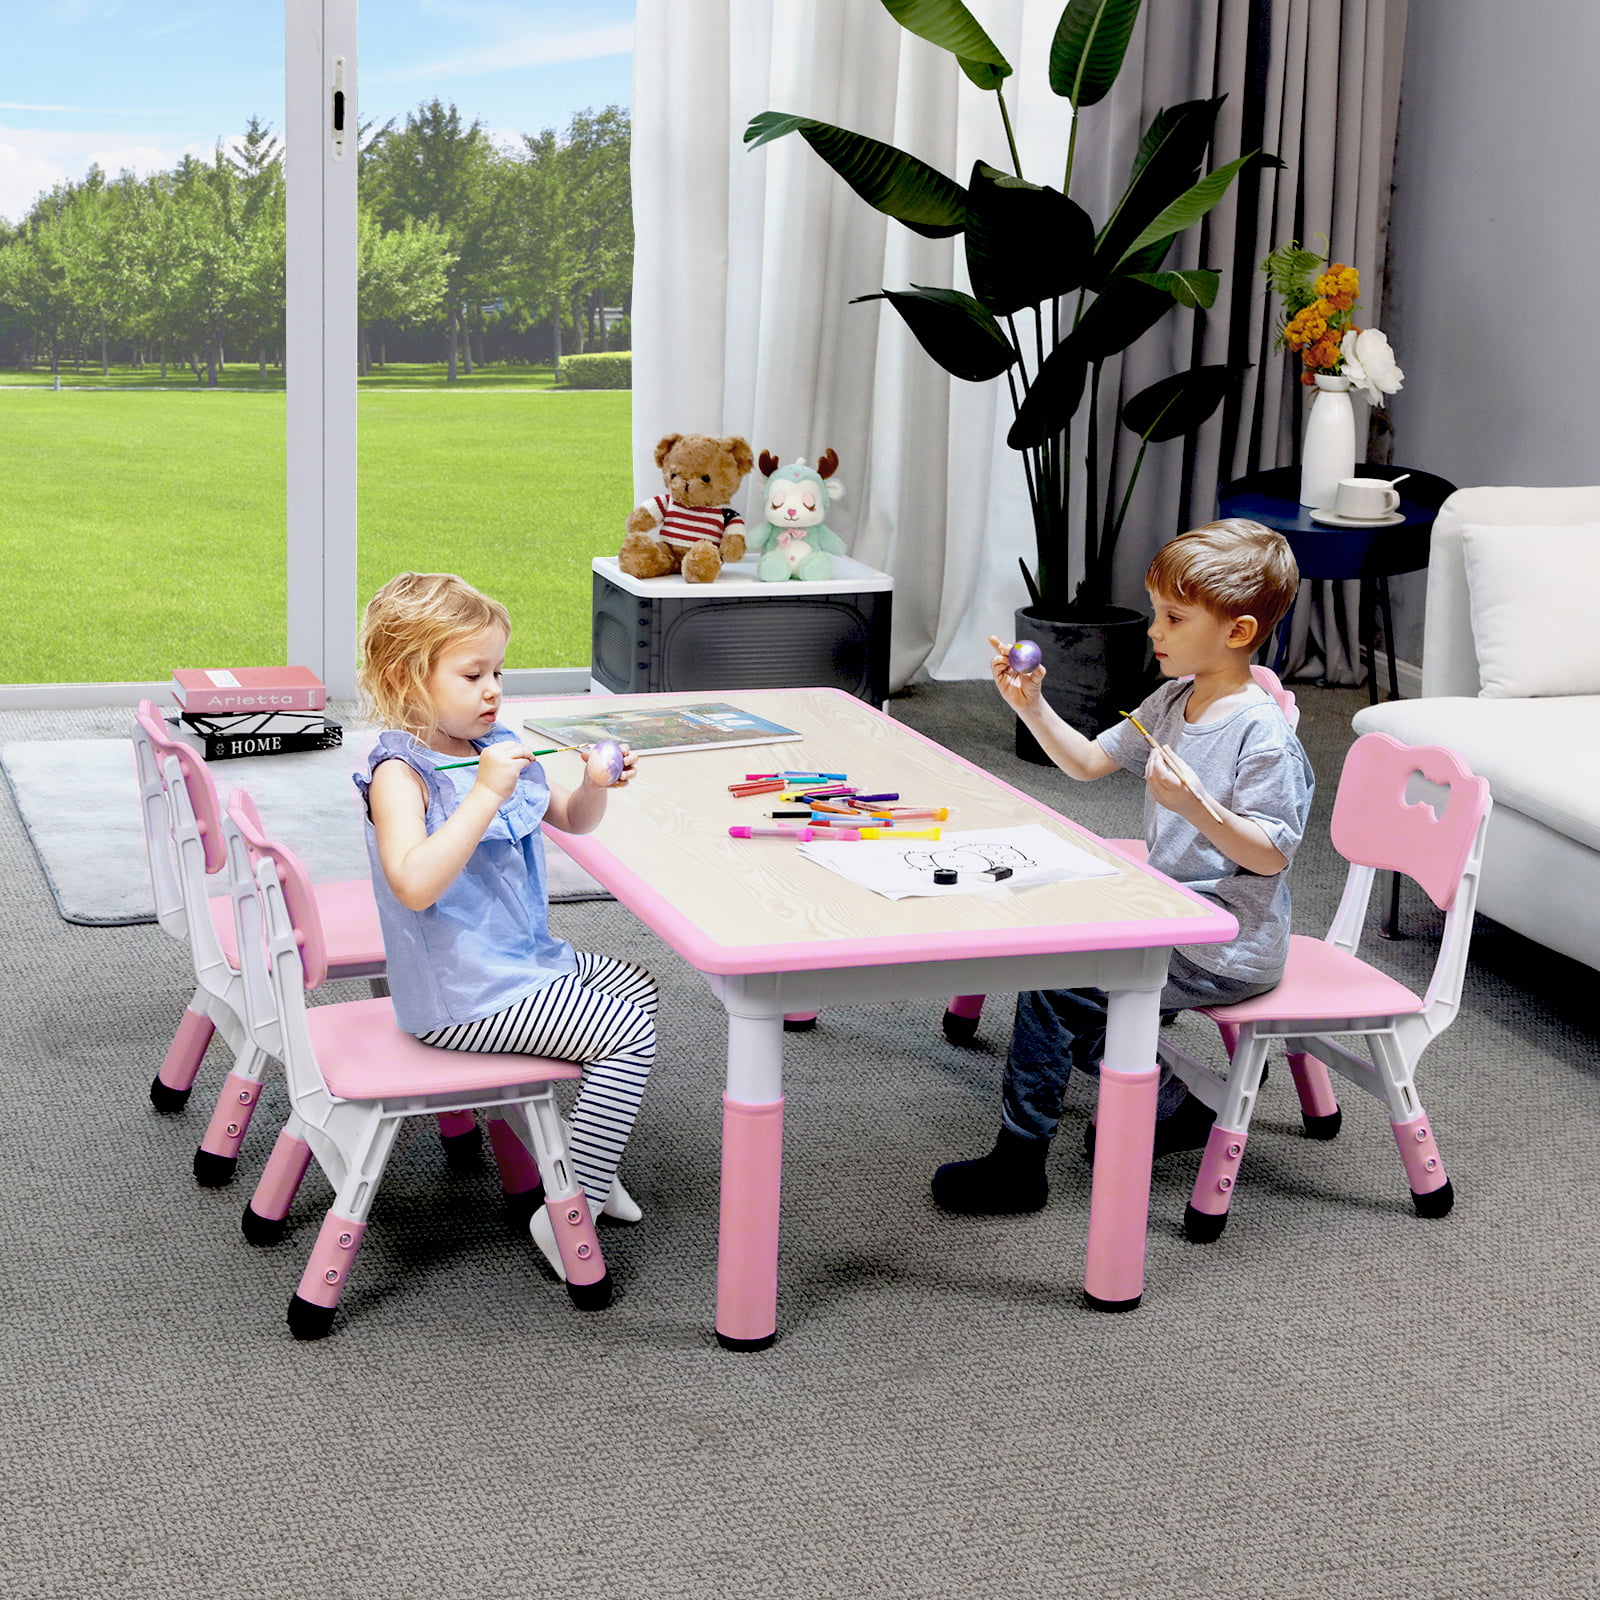 16 OF OUR FAVOURITE PLAY TABLES FOR KIDS — WINTER DAISY